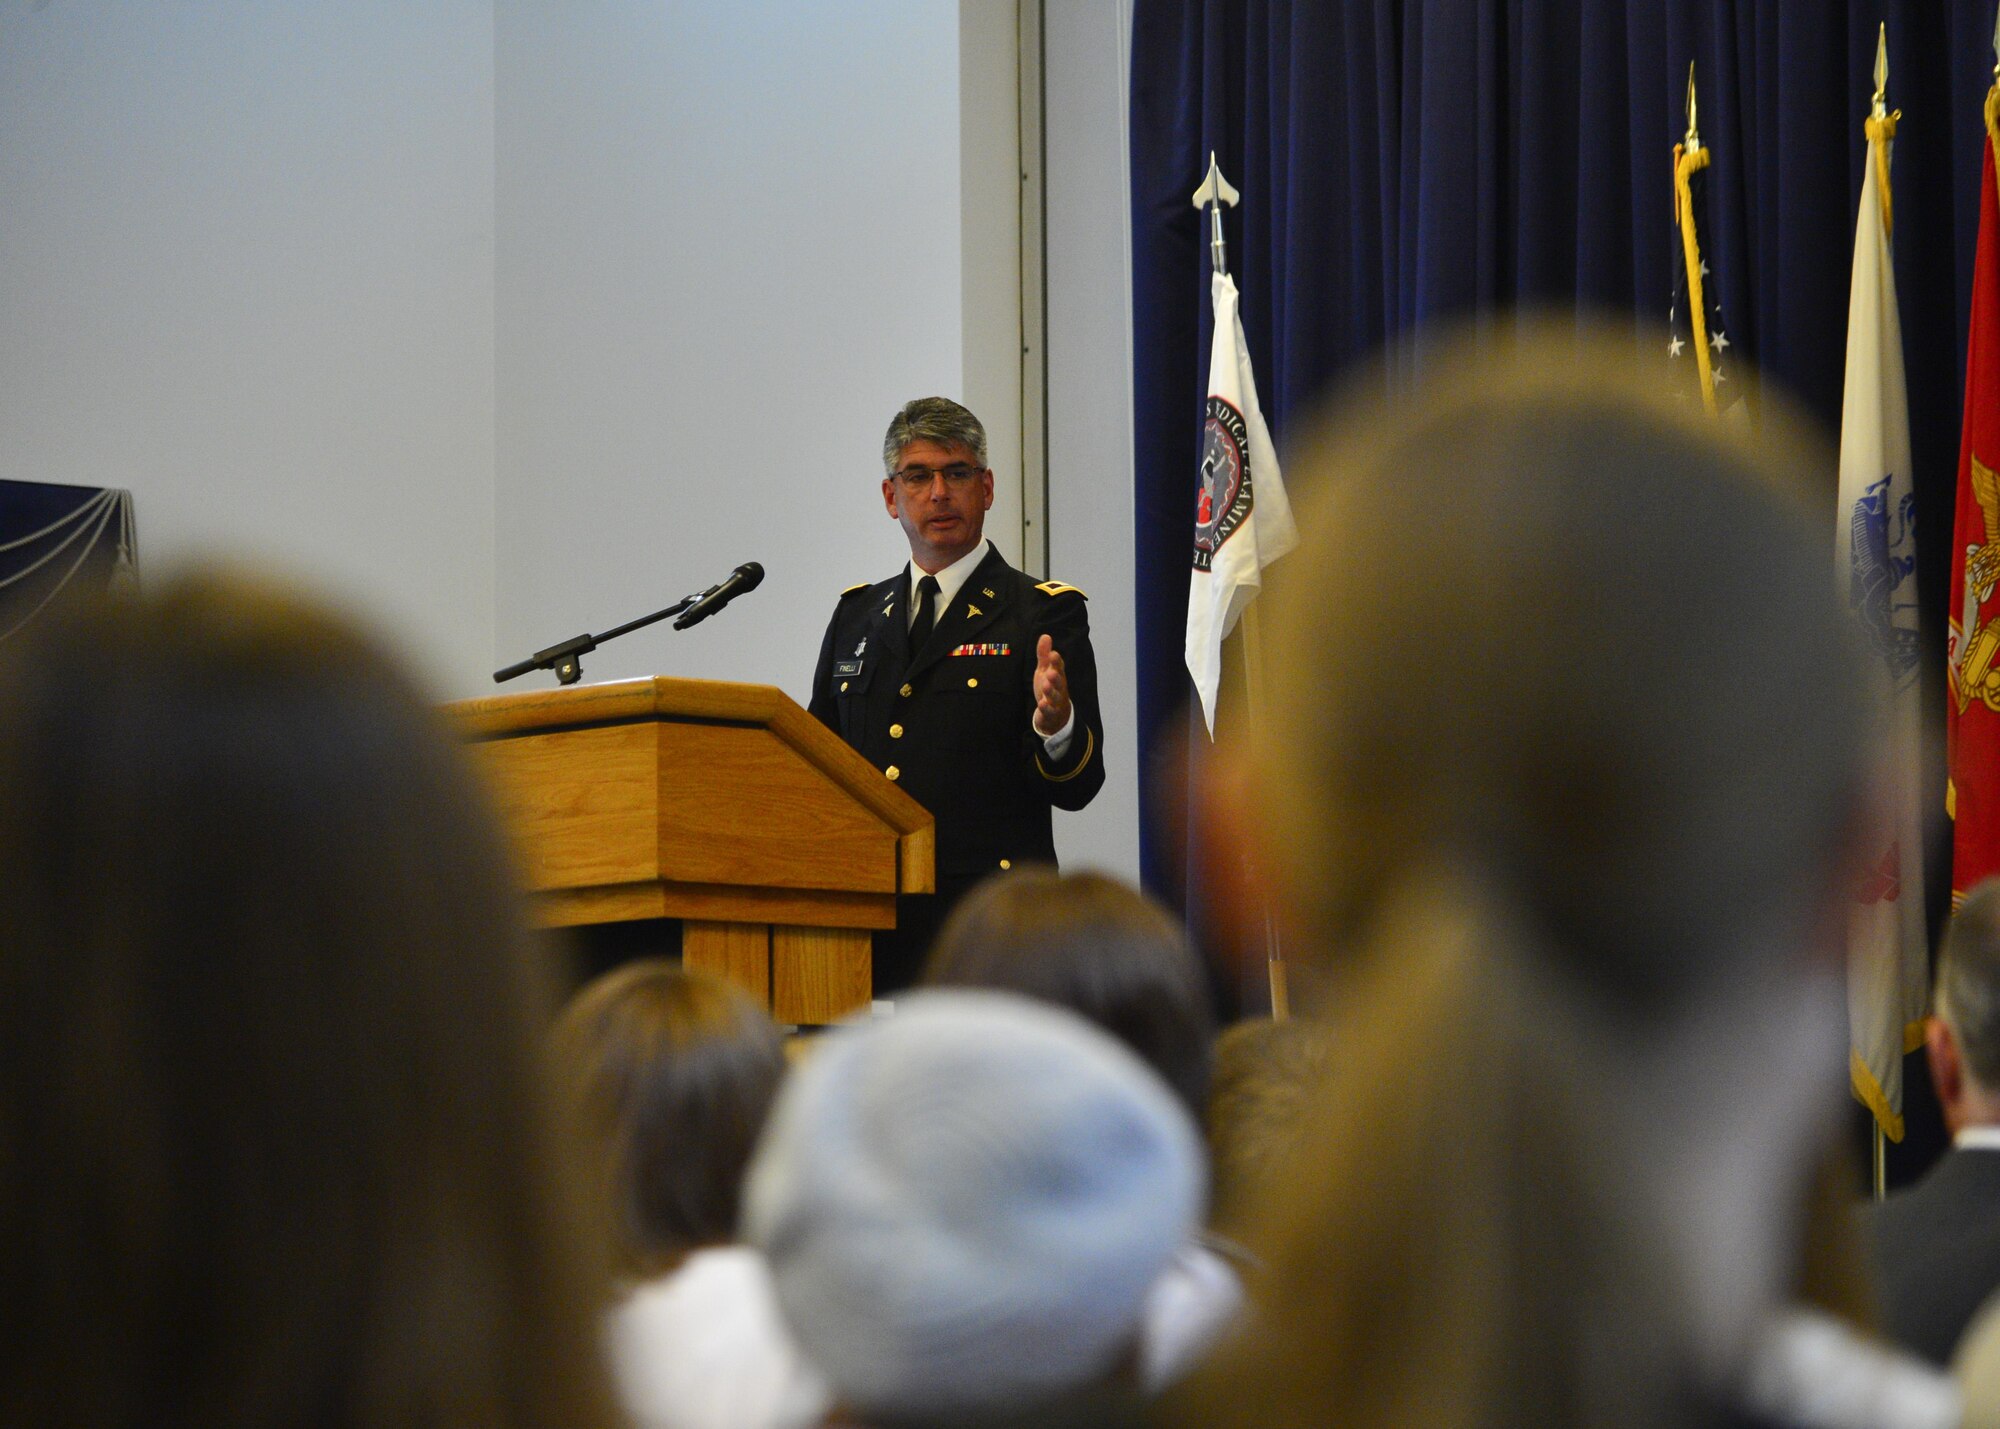 Army Col. Louis Finelli, Armed Forces Medical Examiner System director, speaks at a Change of Directorship Ceremony July 18, 2016, at the Landings on Dover Air Force Base, Del. Finelli assumed directorship of AFMES from Army Col. Ladd Tremaine during the ceremony officiated by Navy Rear Adm. Colin Chinn, Defense Health Agency director of research, development and acquisition. (U.S. Air Force photo/Senior Airman William Johnson)